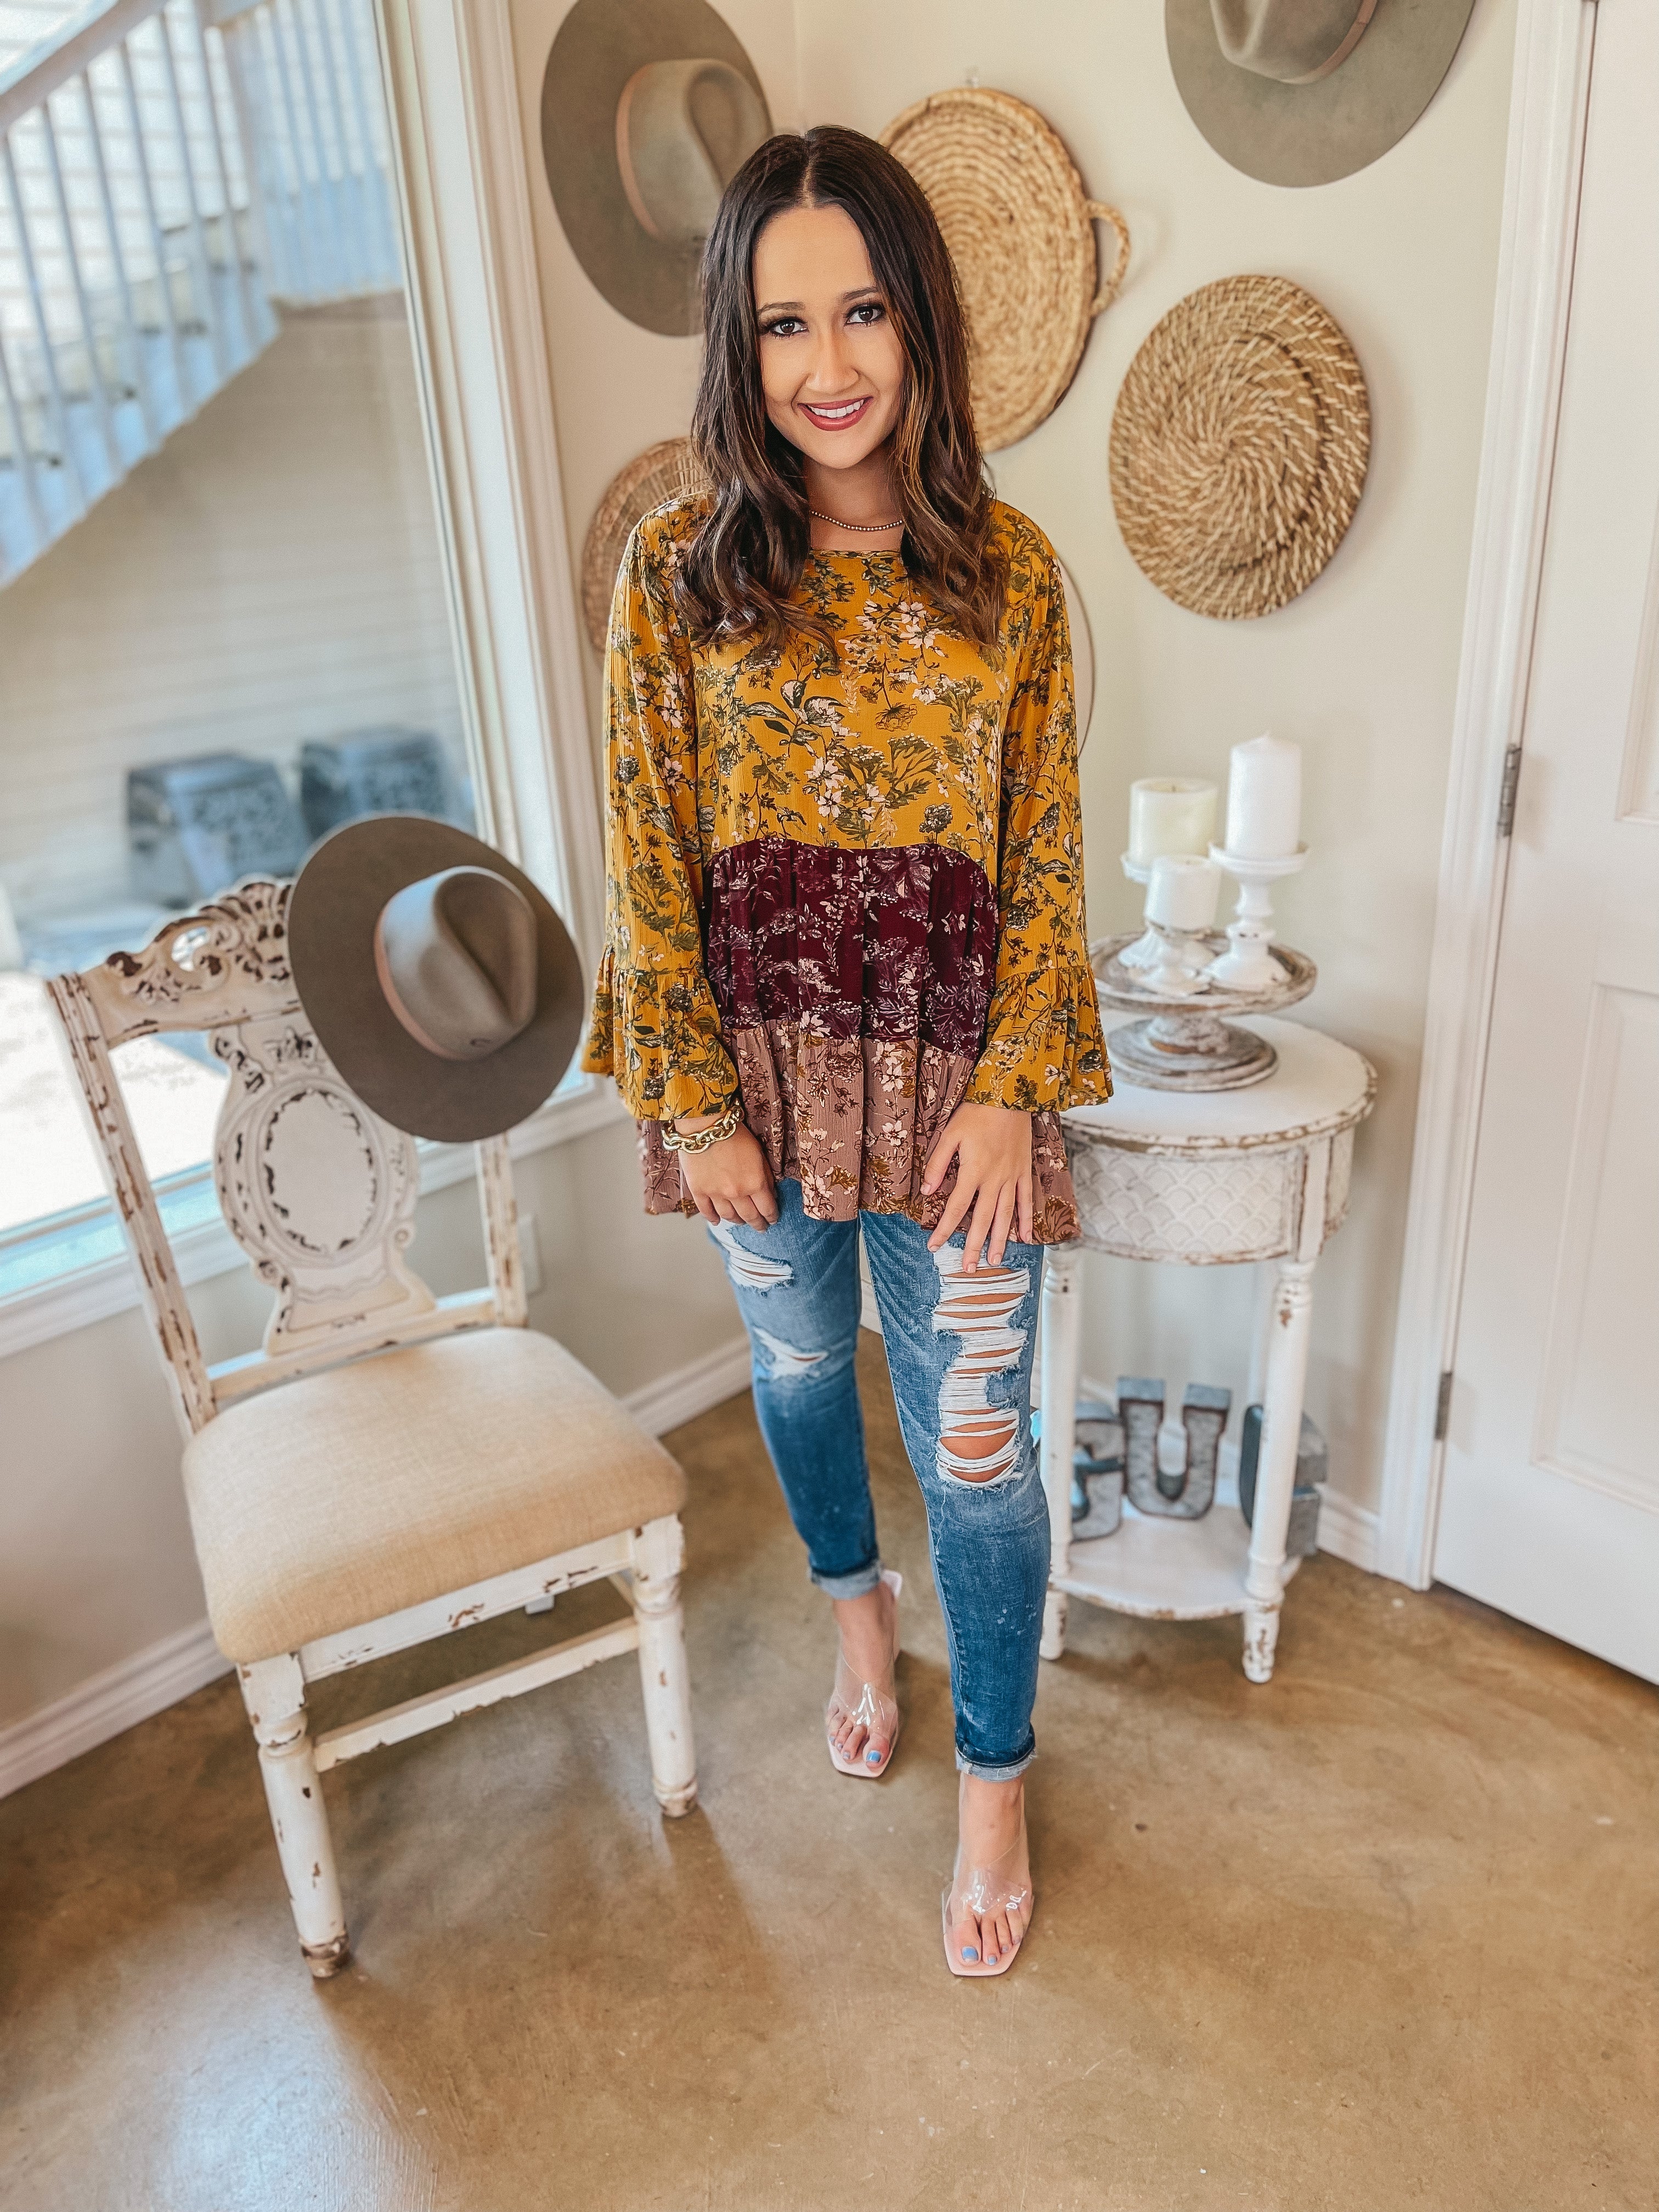 Falling For Style Floral Ruffle Tier Long Sleeve Top in Taupe, Mustard, and Burgundy - Giddy Up Glamour Boutique